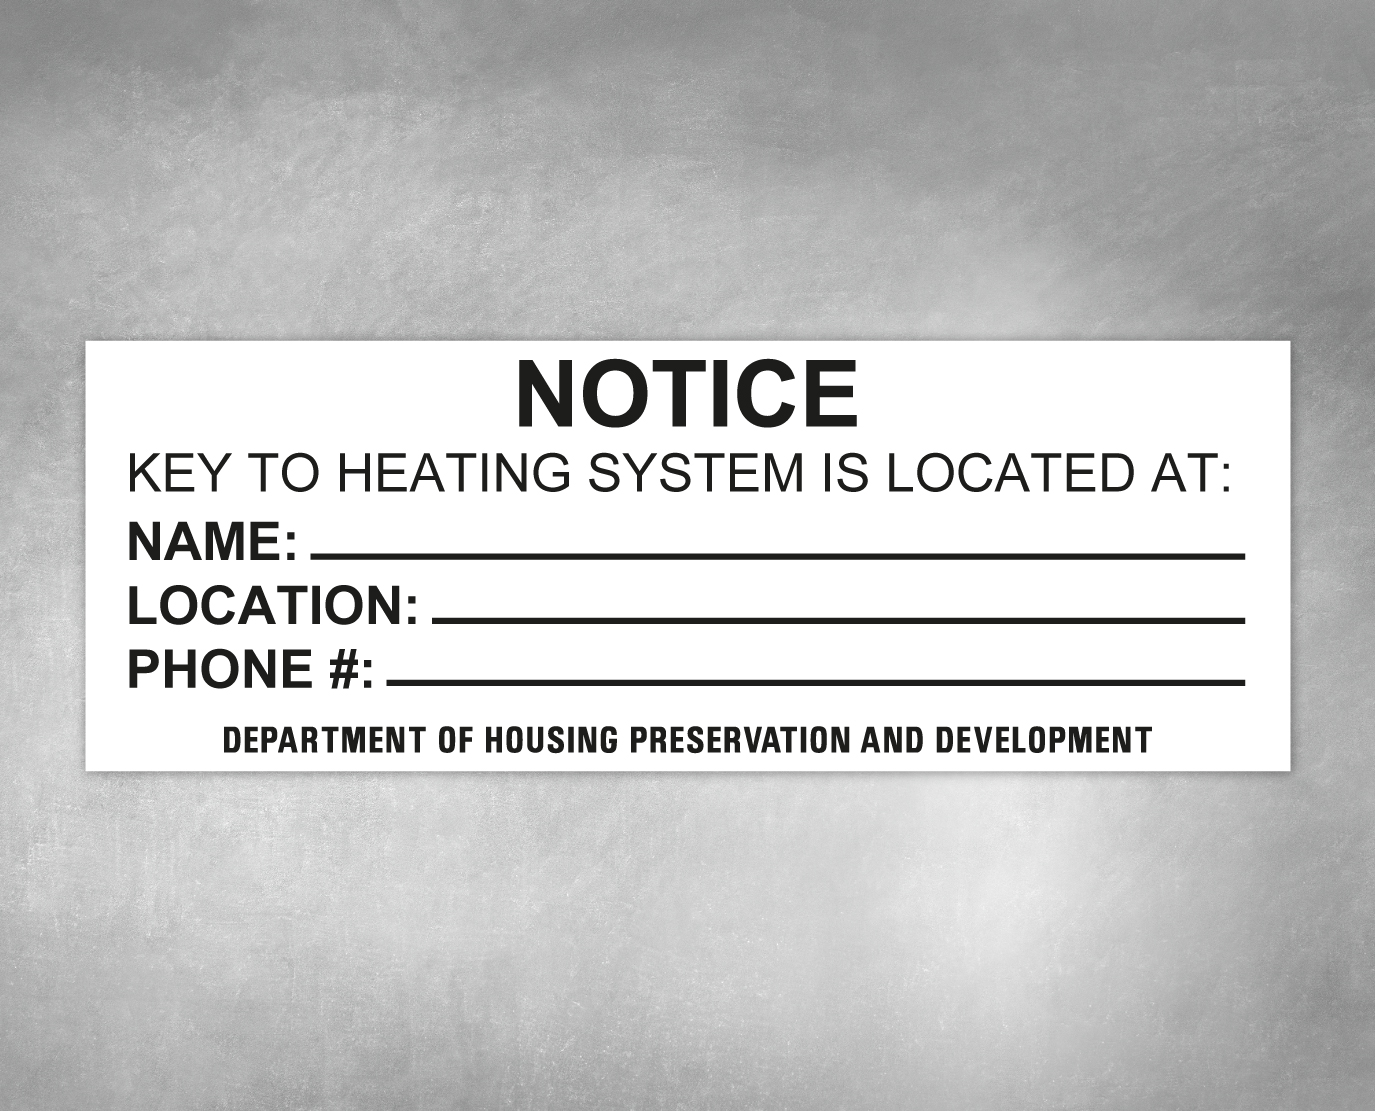 Key To Heating System Building Sign